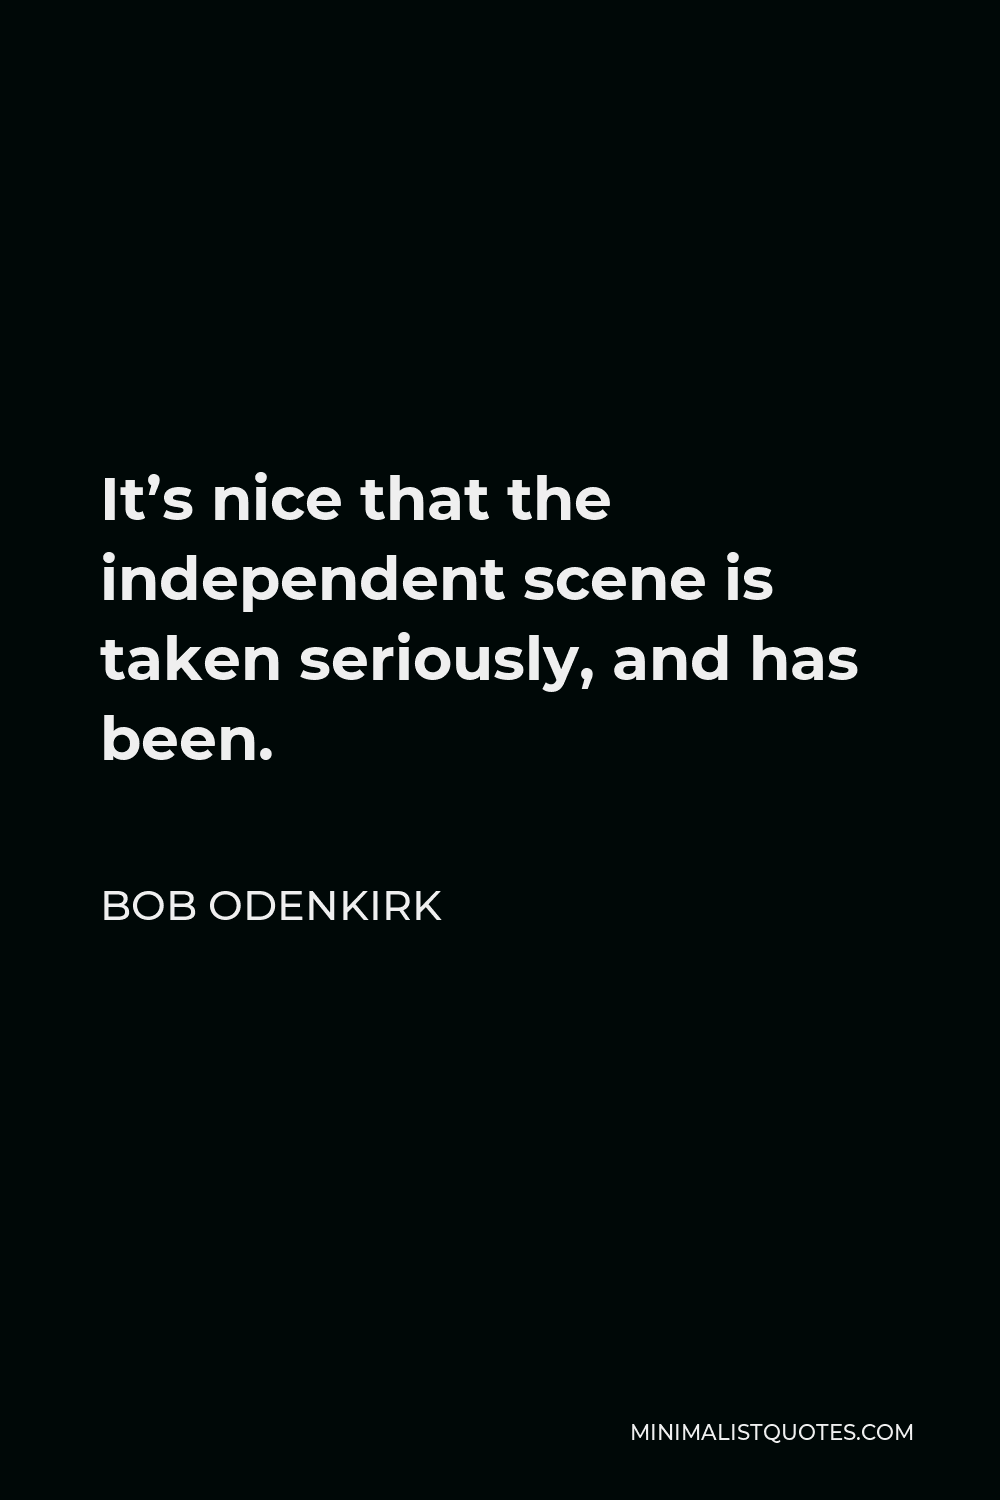 Bob Odenkirk Quote - It’s nice that the independent scene is taken seriously, and has been.